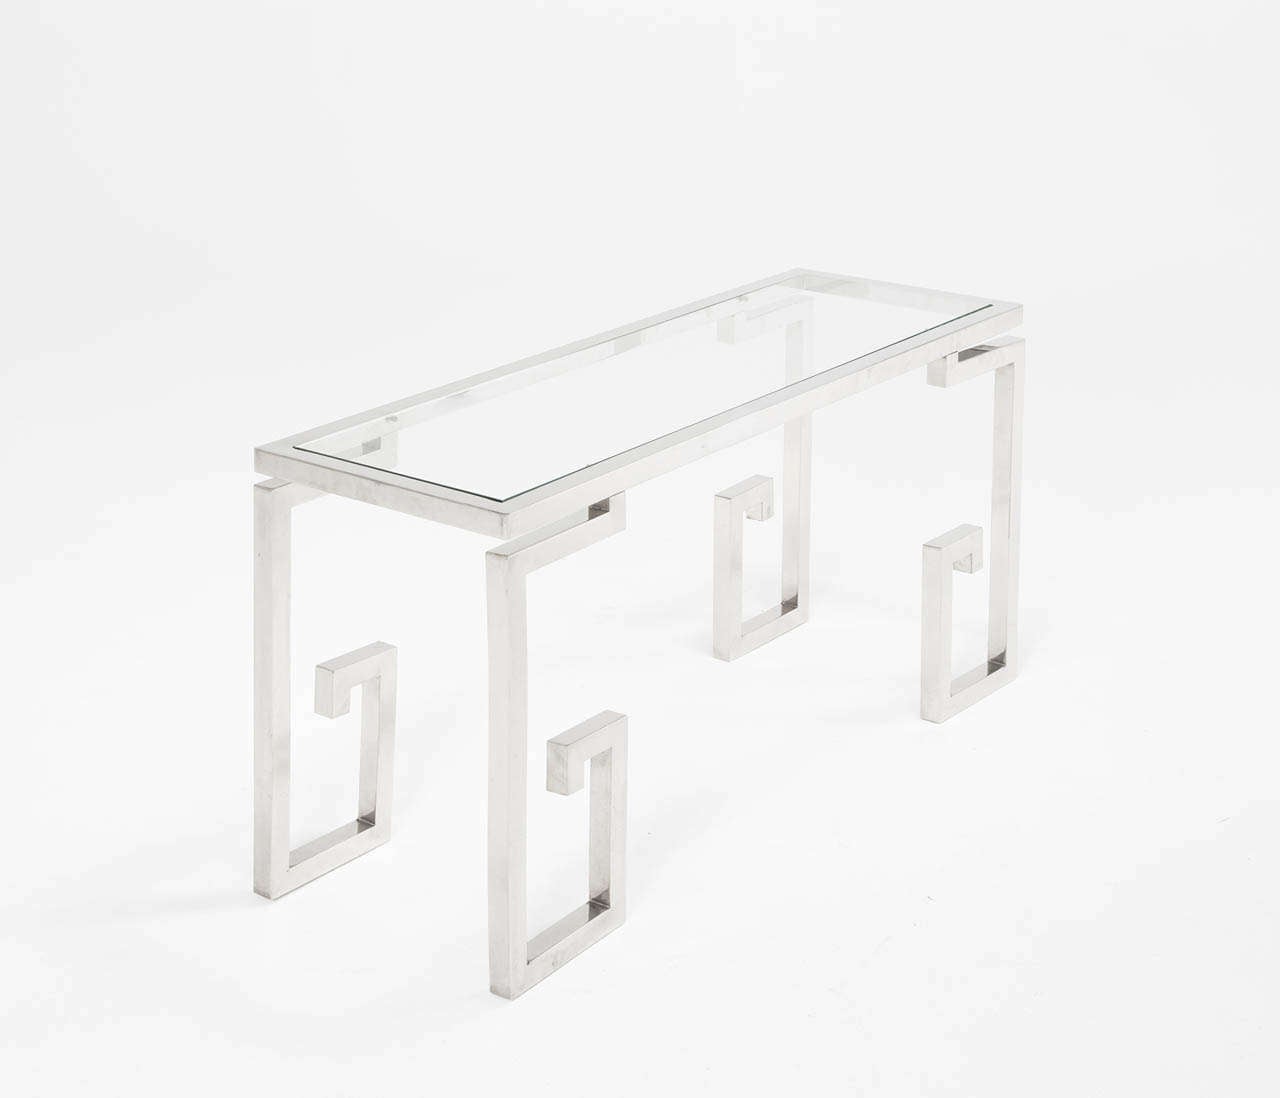 Wall console in chrome and glass, France, 1970s.

Rectangular clear glass top with four G-shaped or curled legs. The clear glass nicely reflects the shimmer of the chrome.

We offer a variety of services, high service white glove shipping,